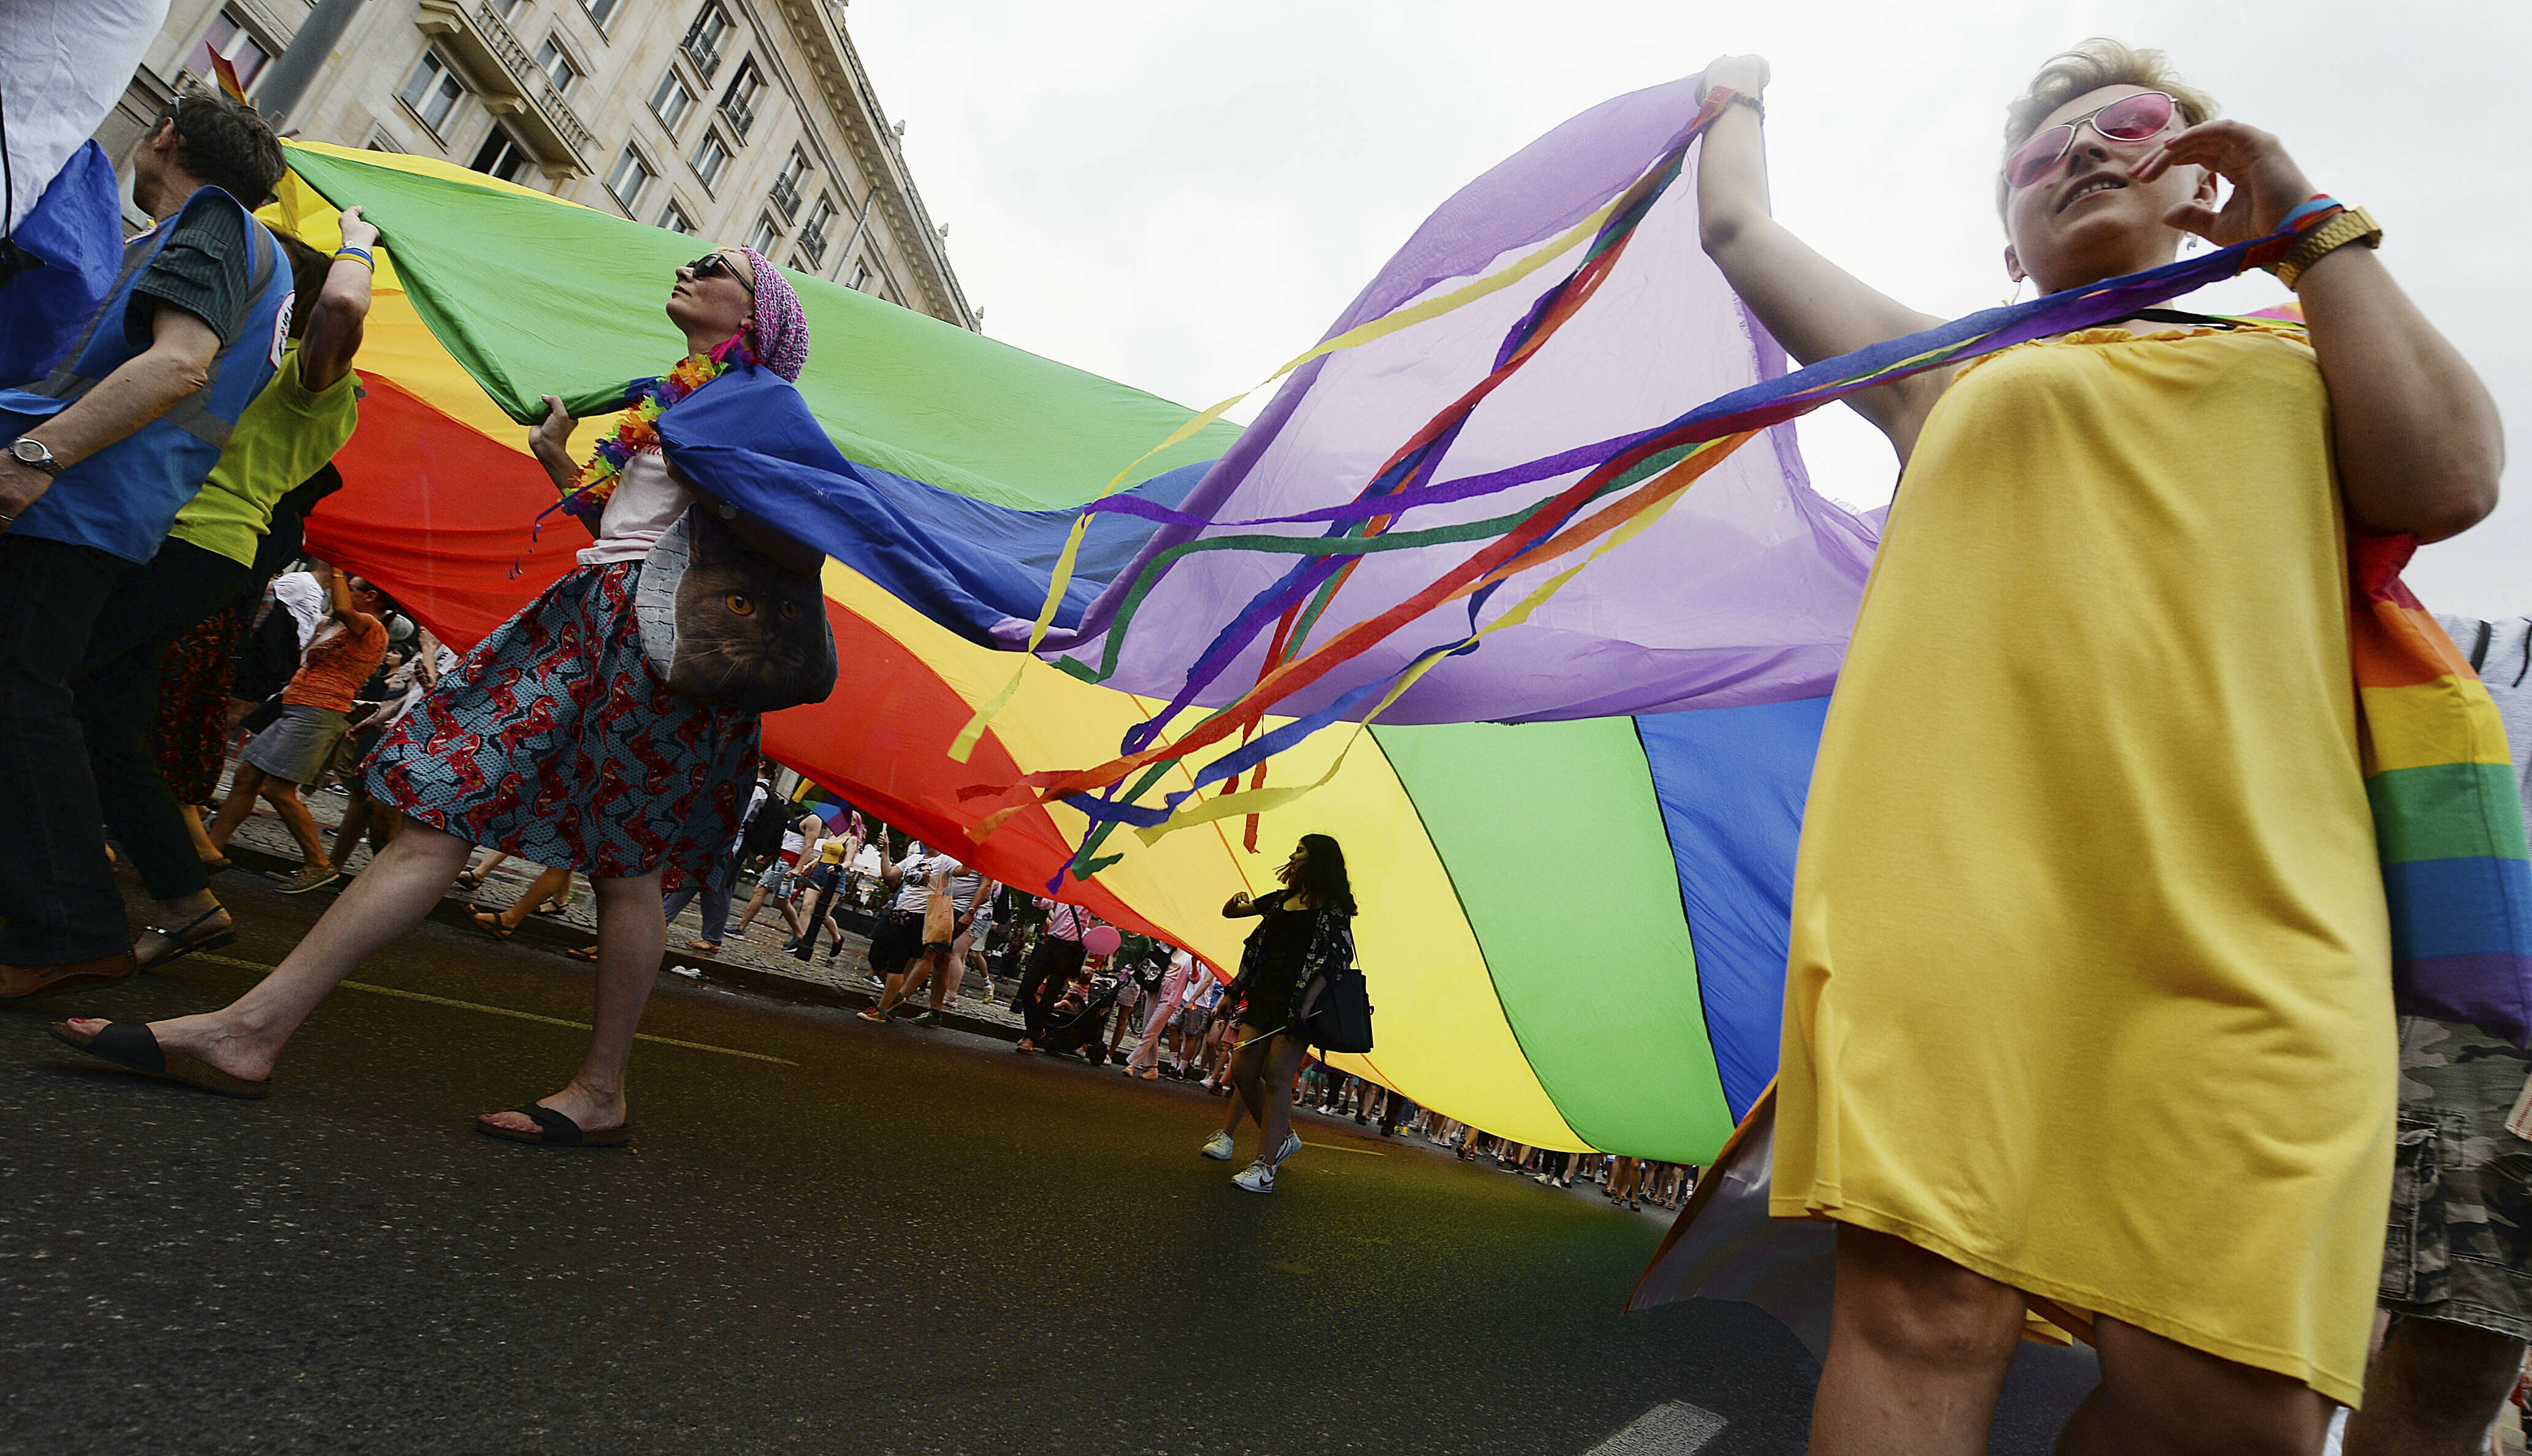 Mayor joins pride parade amid Poland's antiLGBT campaign